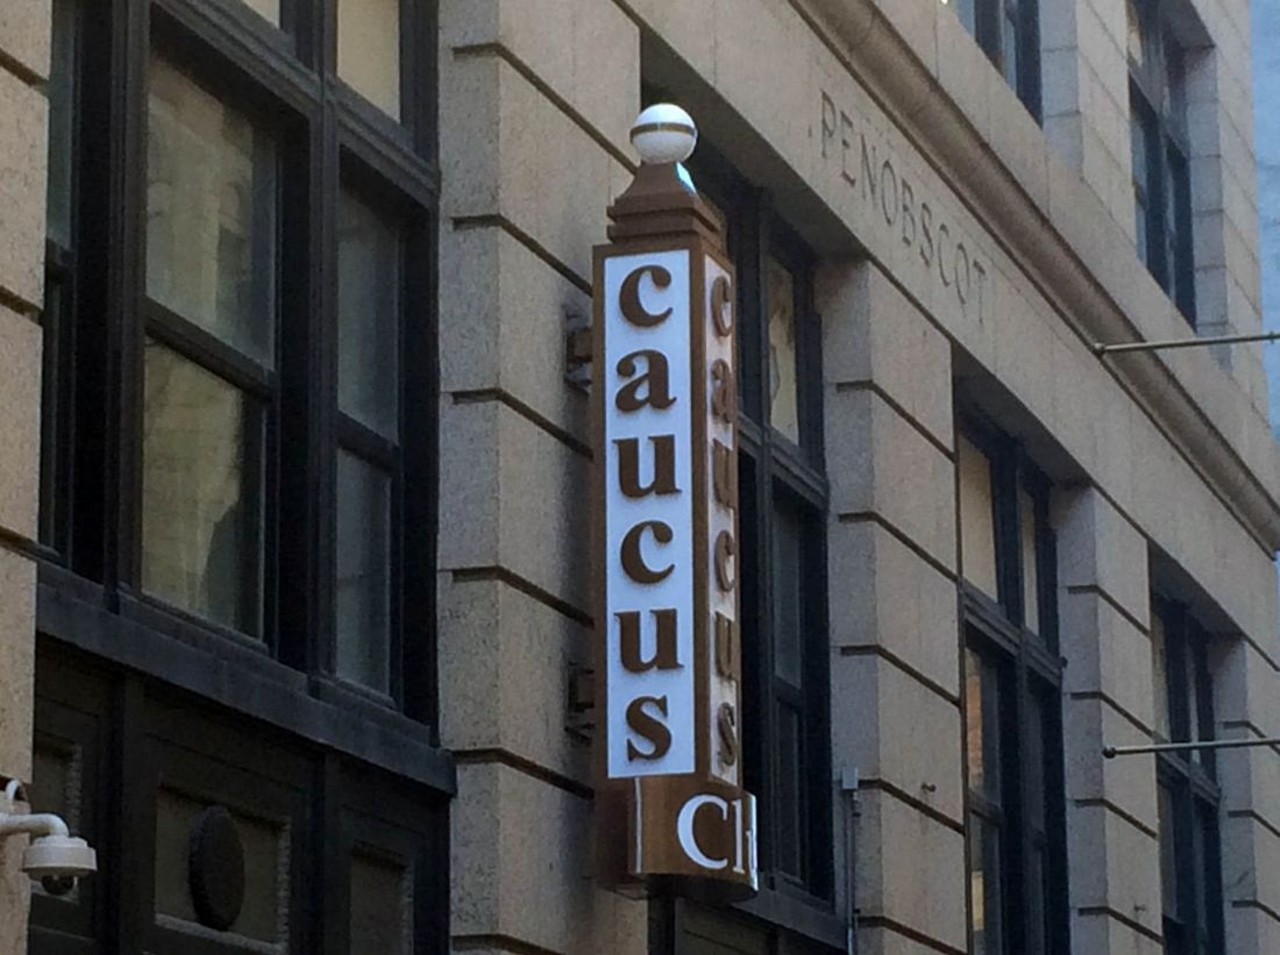  Caucus Club   
Penobscot Building, 150 W. Congress St.; 313-965-4970
Another historic dining destination, the Caucus Club was opened in 1952 as the sister restaurant to the world-famous London Chop House. Now renovated and restored, the Caucus Club reopened in 2017 to bring this classic spot back to the Motor City. The dinner menu leans heavily on steaks and chops, featuring lamb, pork, and veal chops and a massive 32-ounce Tomahawk Ribeye Chop for $114.  
MT file photo